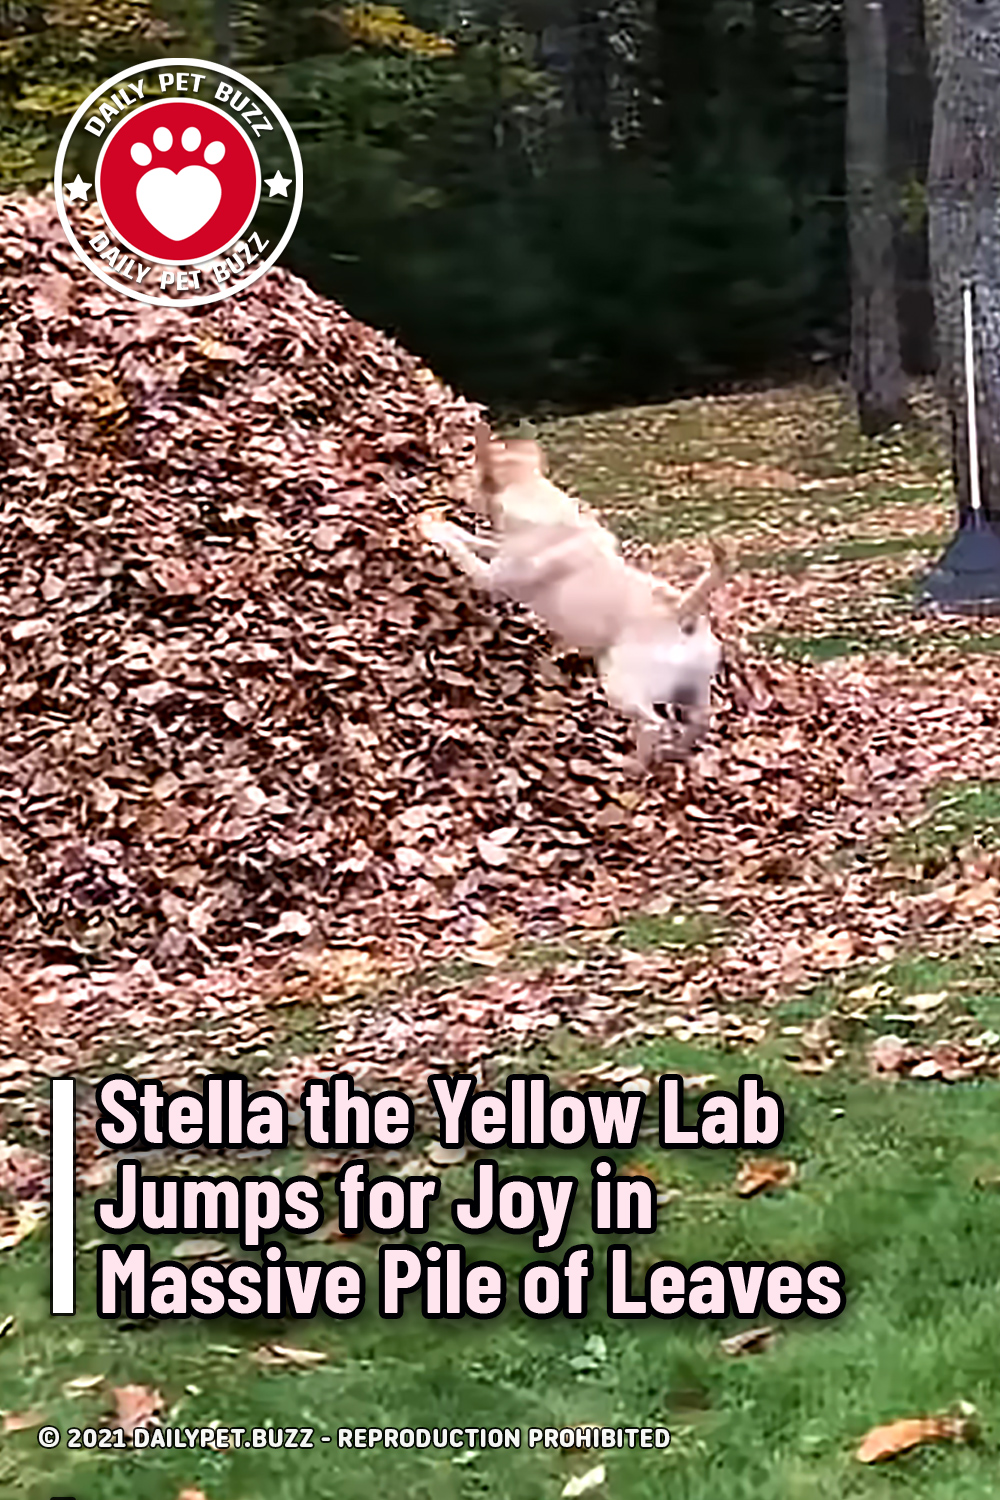 Stella the Yellow Lab Jumps for Joy in Massive Pile of Leaves